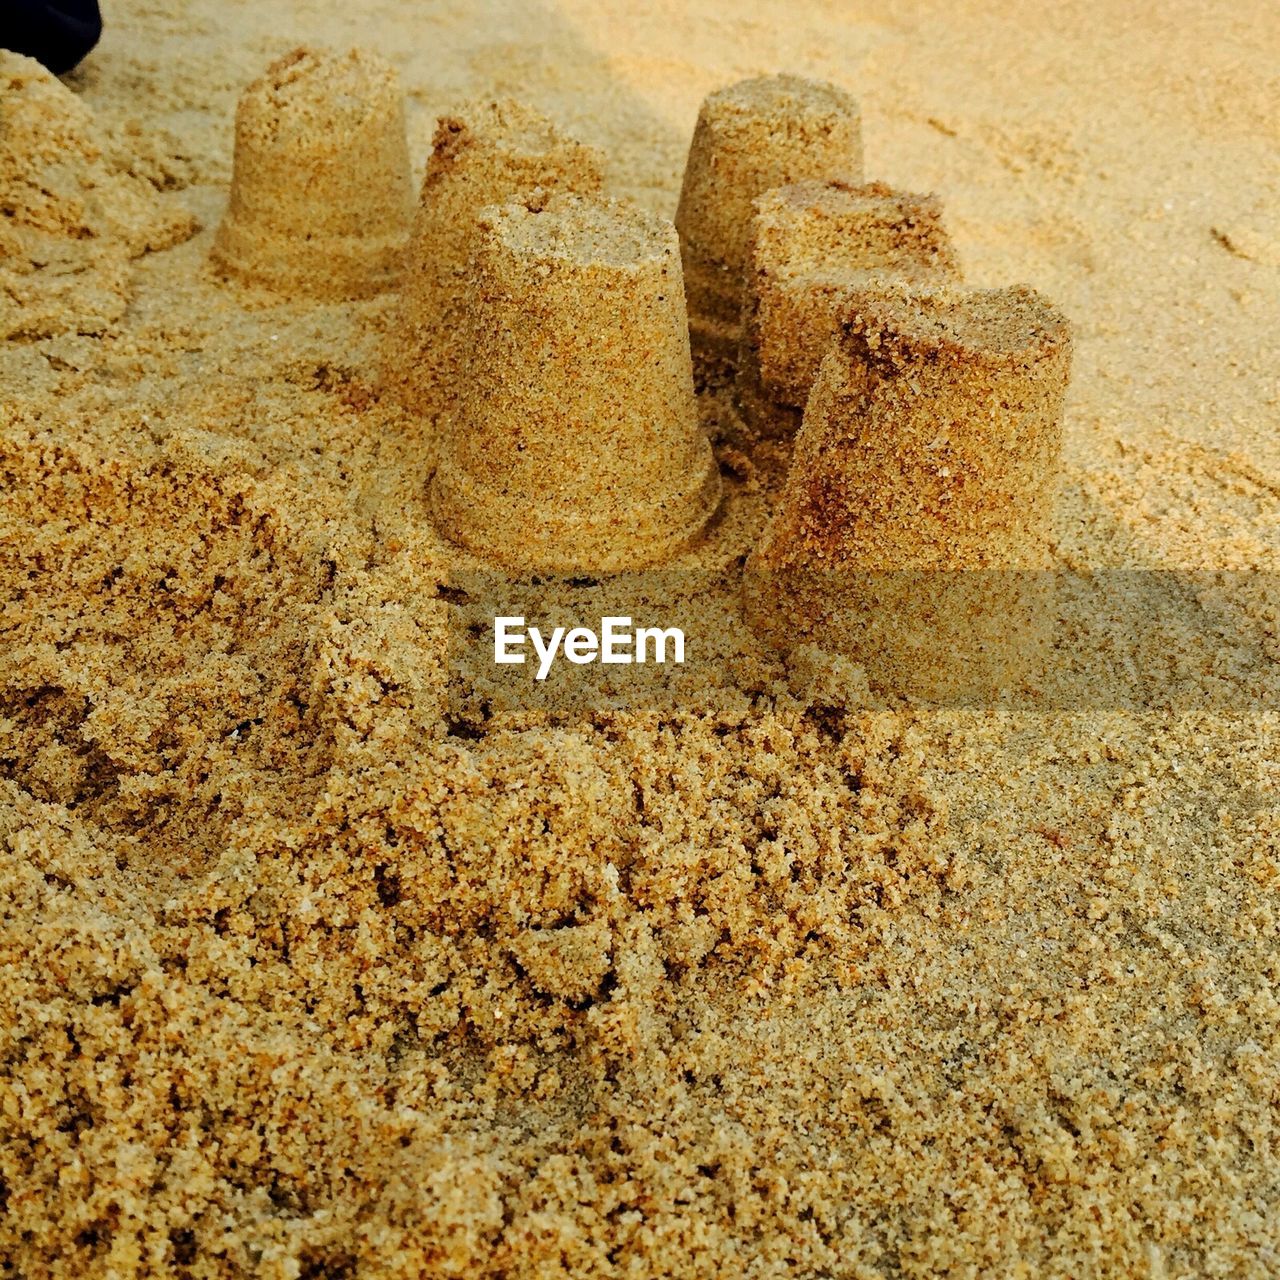 CLOSE-UP VIEW OF SAND